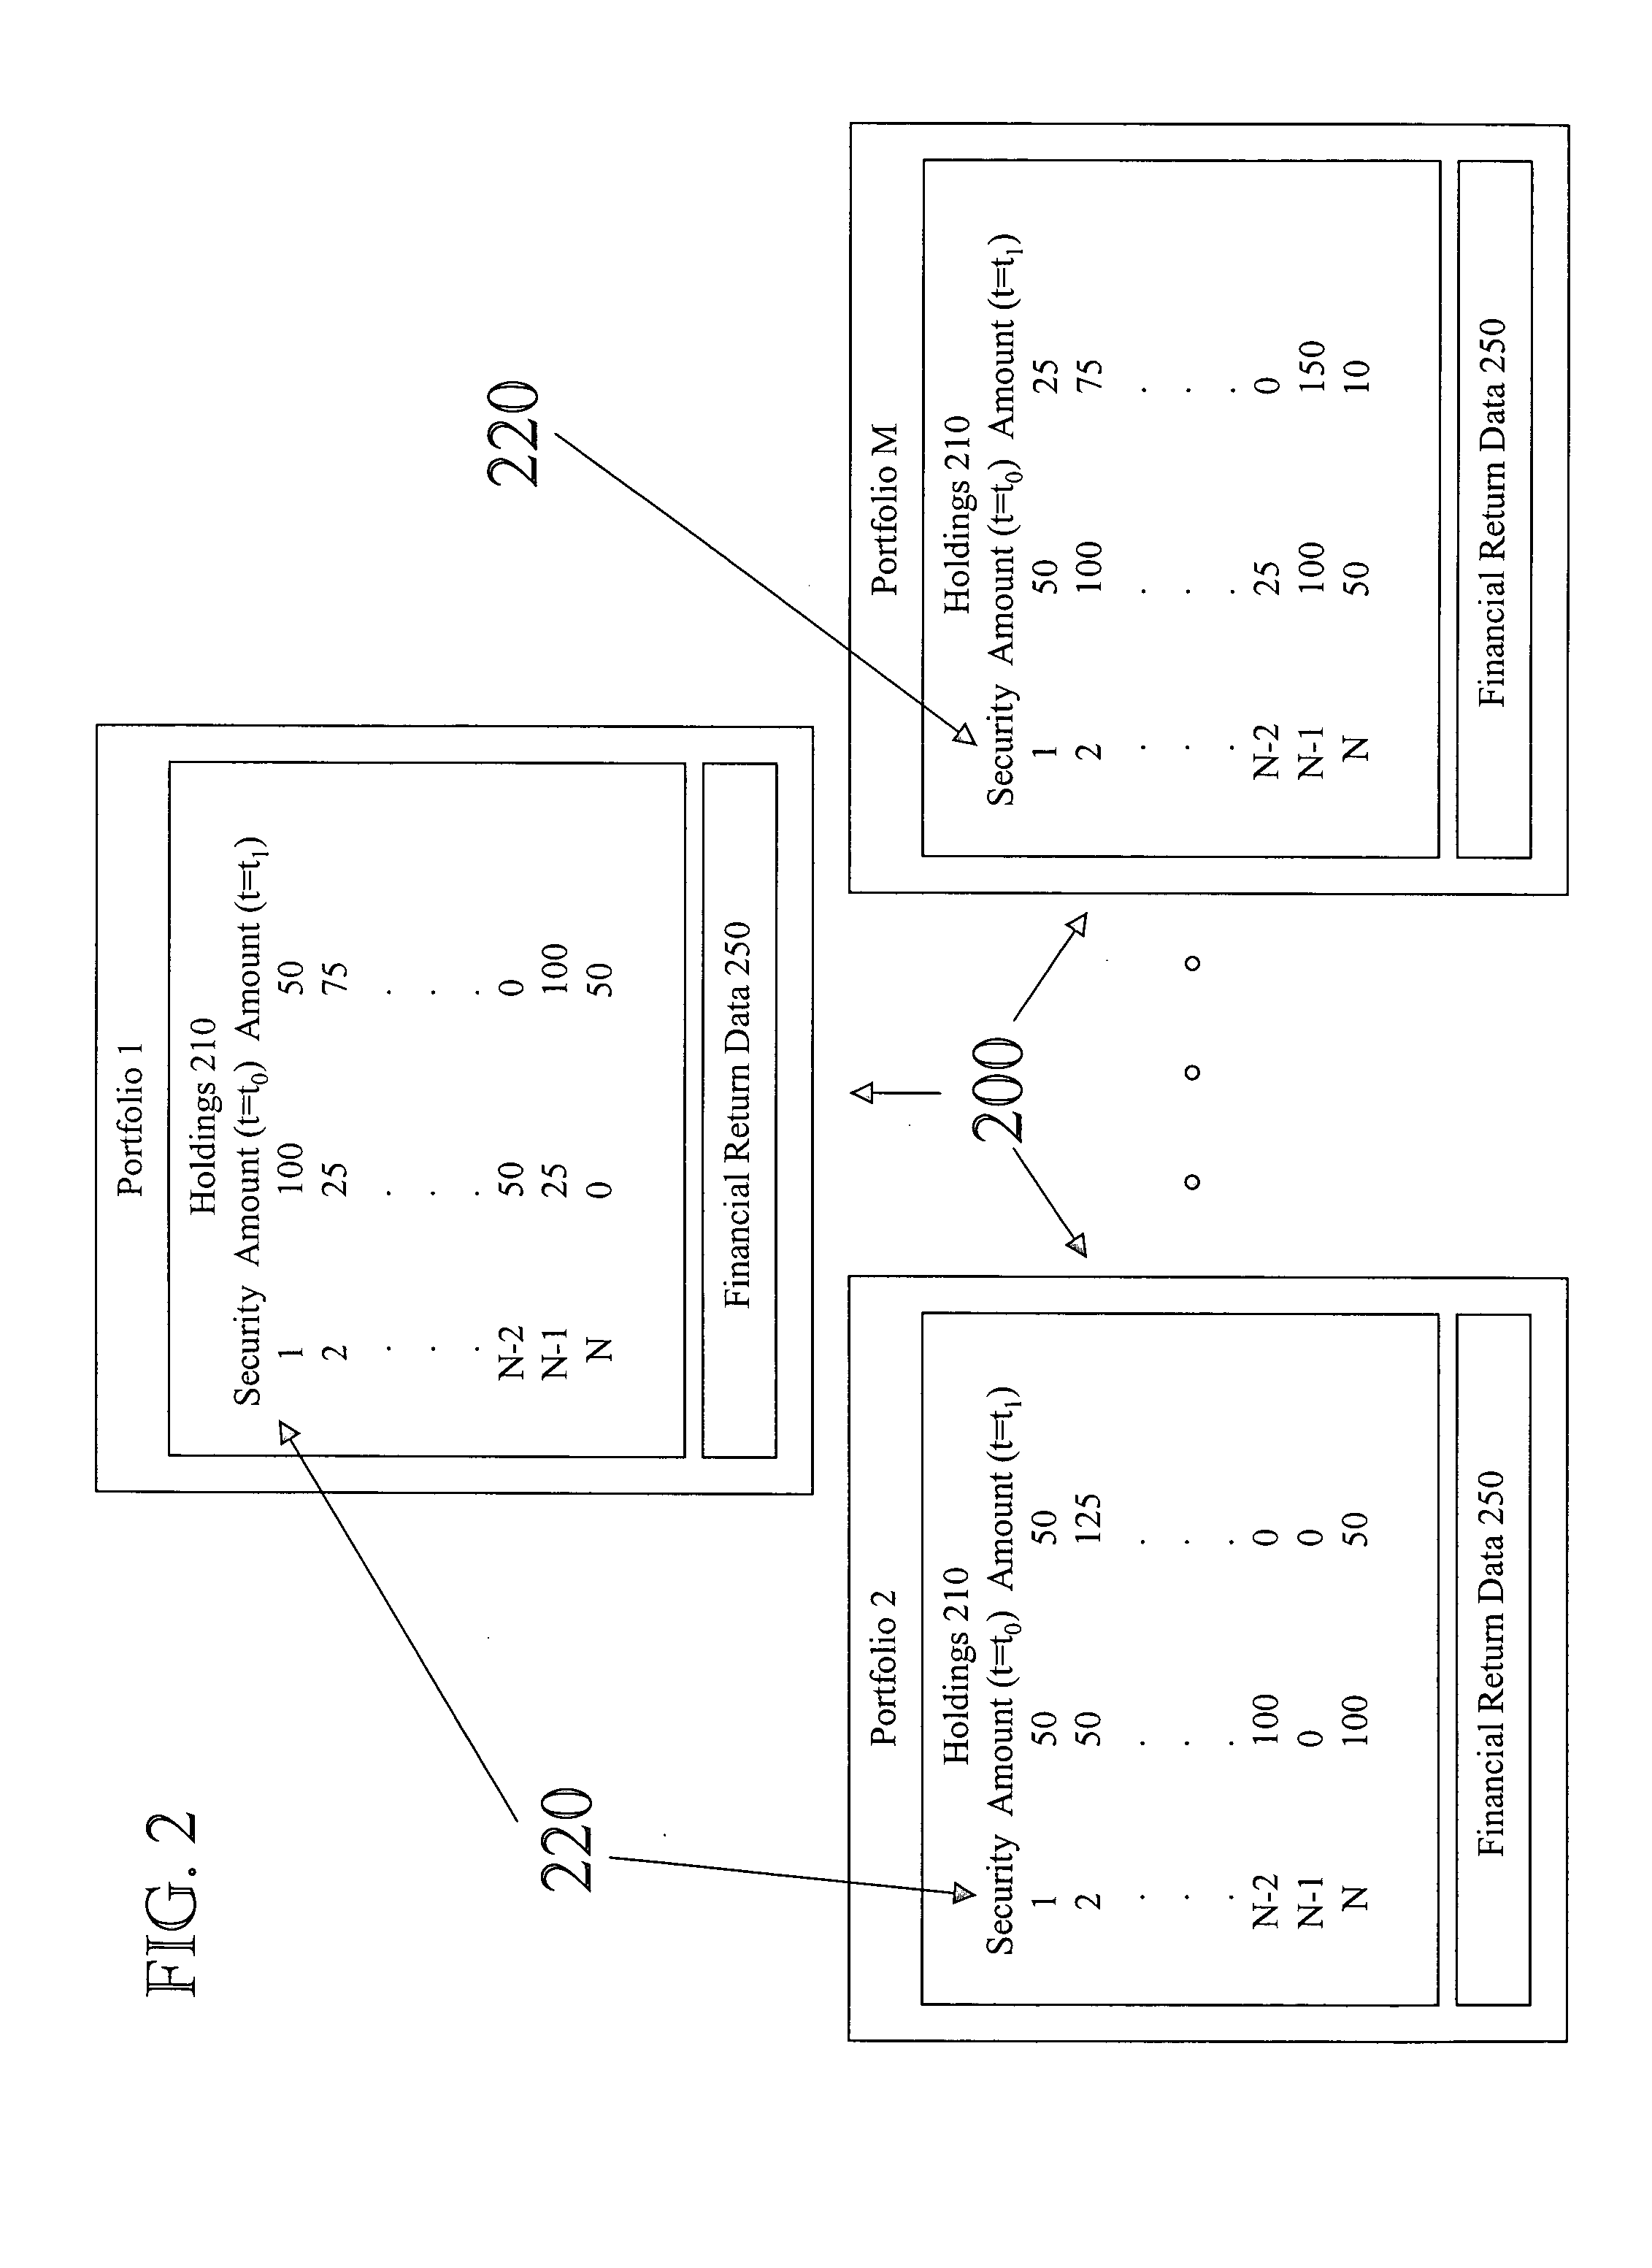 Systems and methods for computing performance parameters of securities portfolios